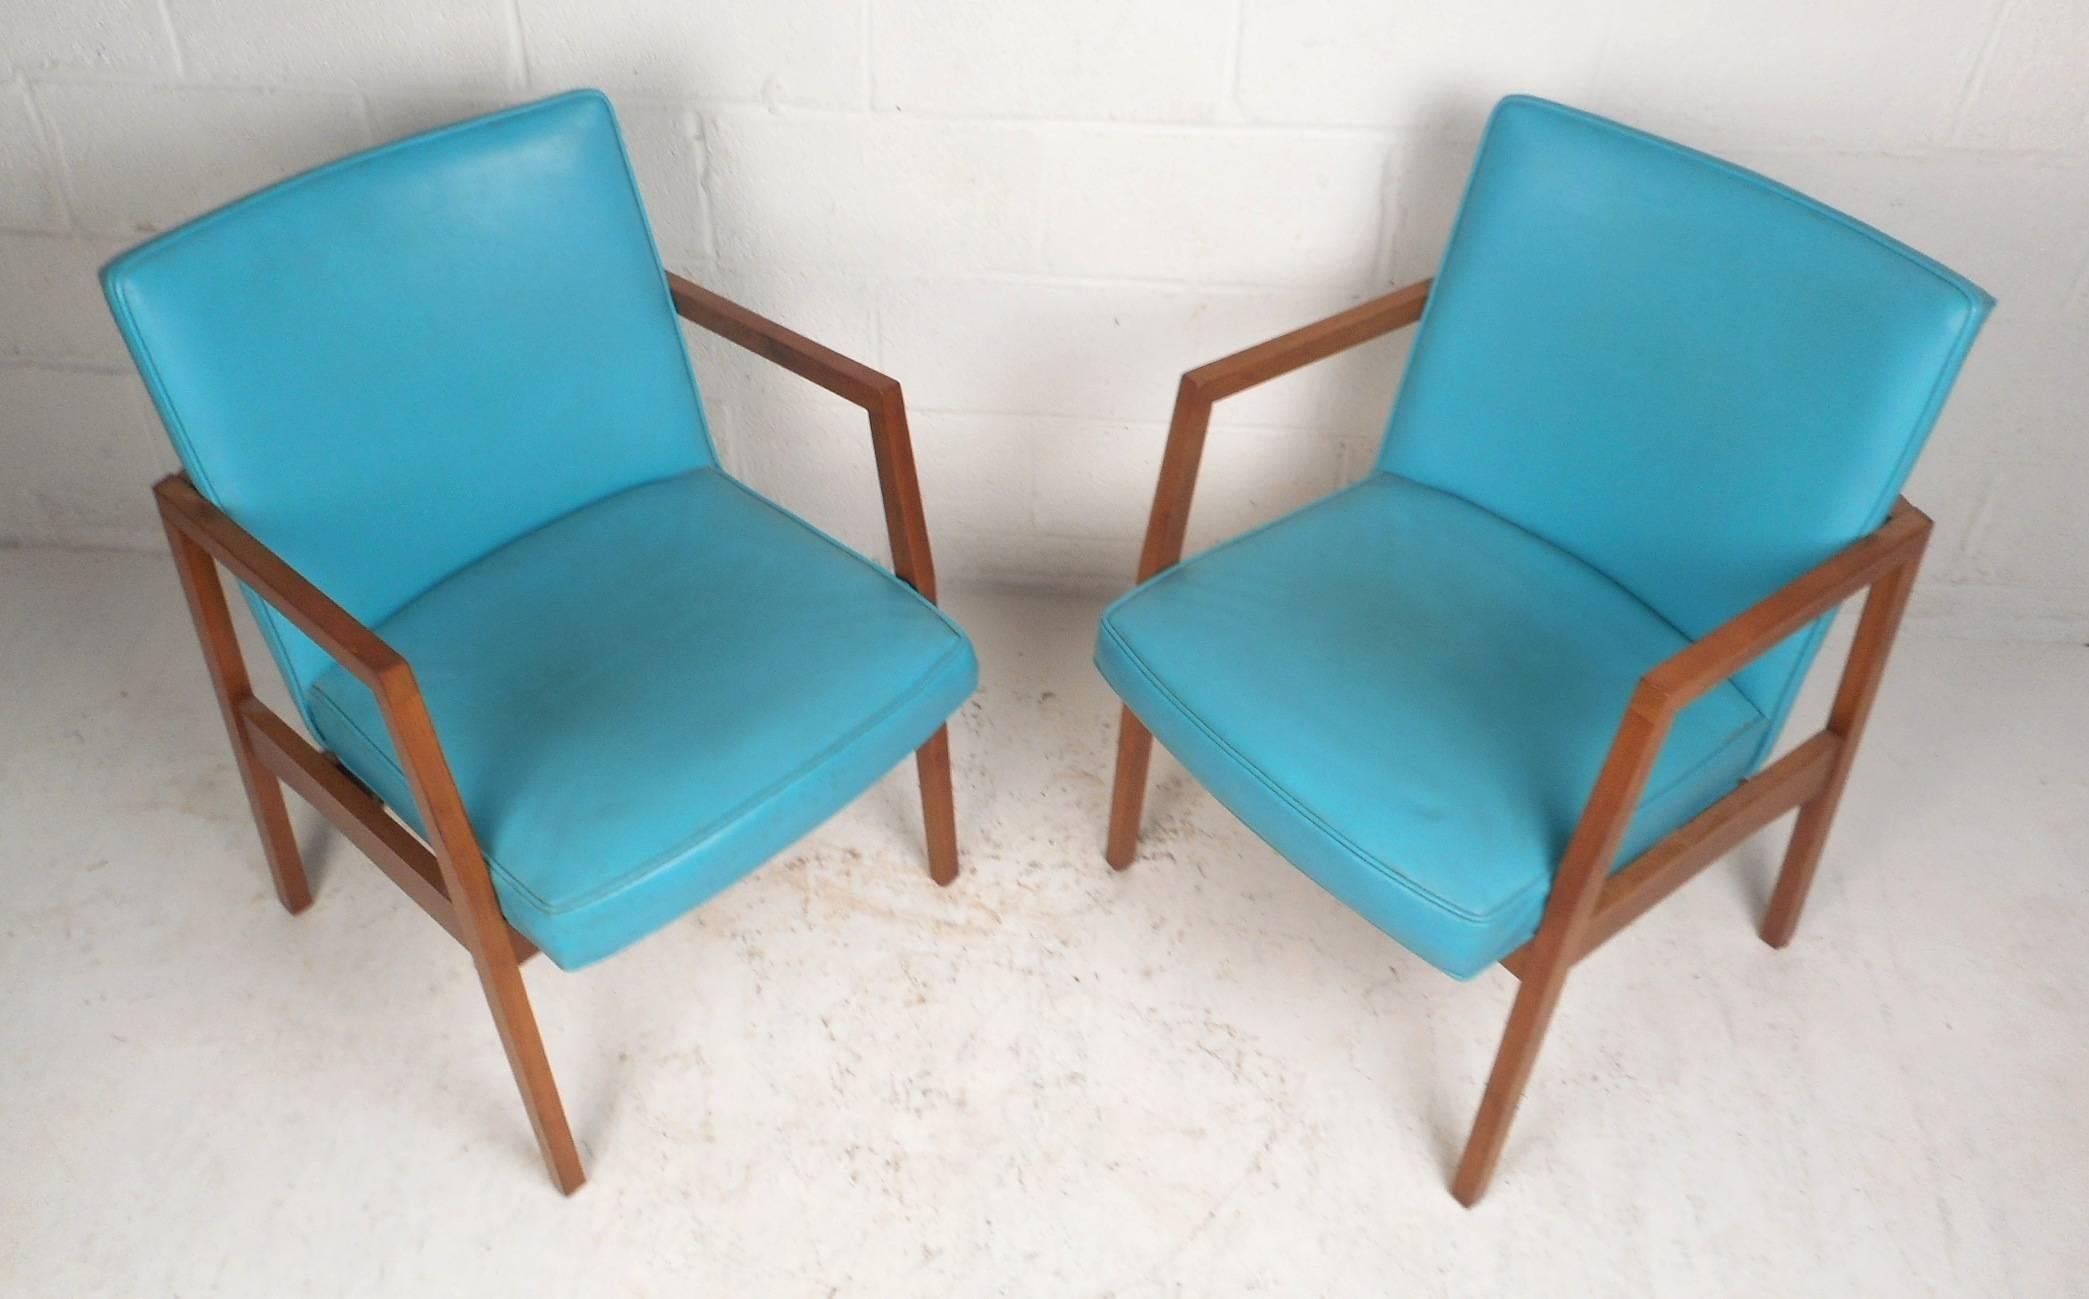 This beautiful pair of vintage modern armchairs feature a walnut frame with angled back legs and elaborate blue vinyl seats. Sleek and comfortable design with high sculpted arm rests and thick padded seating. This fabulous pair makes the perfect